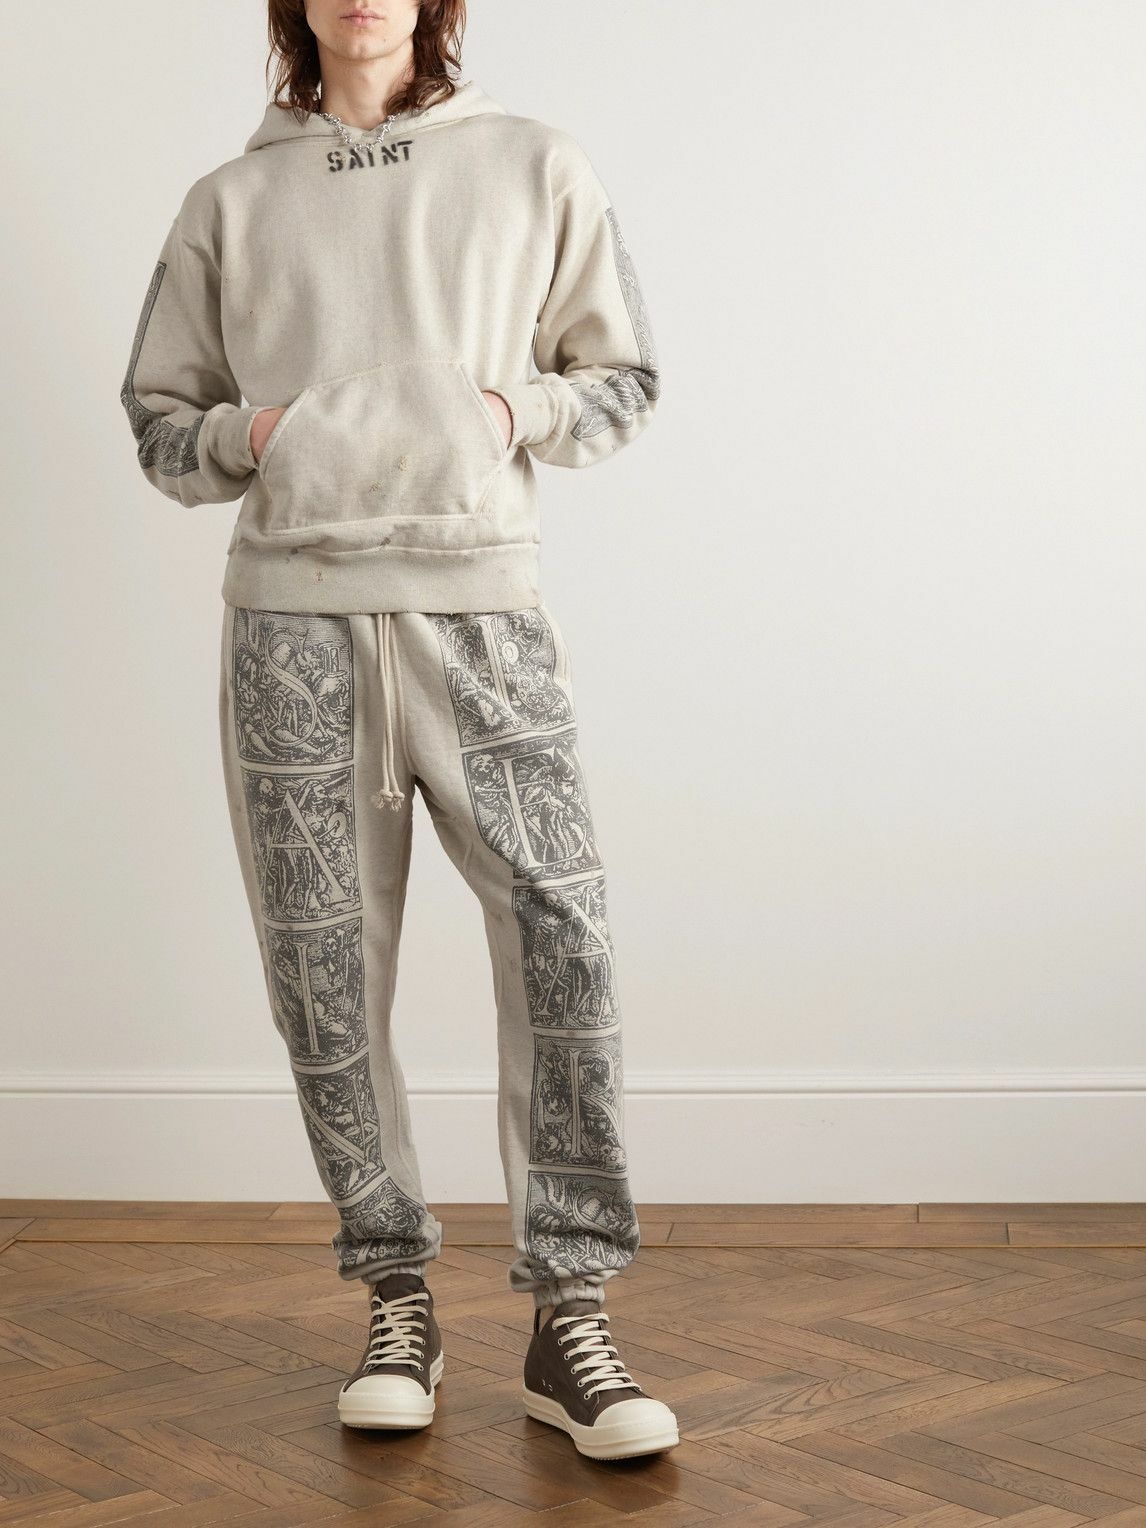 SAINT Mxxxxxx - Denim Tears Tapered Printed Distressed Cotton-Jersey Sweatpants - Gray